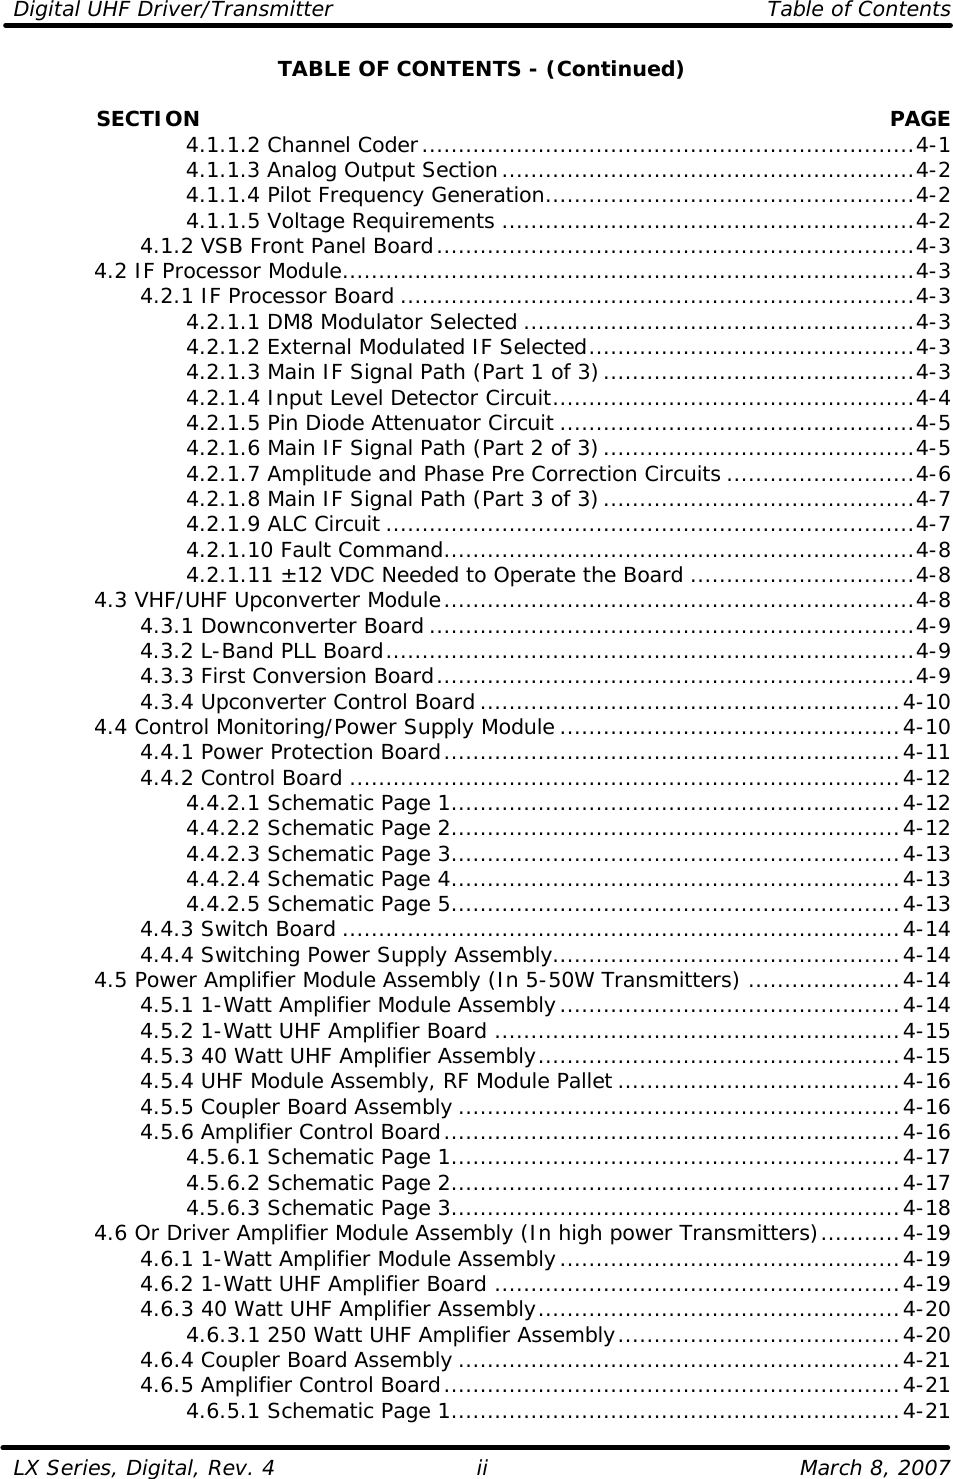 Digital UHF Driver/Transmitter    Table of Contents  LX Series, Digital, Rev. 4    March 8, 2007 iiTABLE OF CONTENTS - (Continued)              SECTION PAGE     4.1.1.2 Channel Coder....................................................................4-1     4.1.1.3 Analog Output Section.........................................................4-2     4.1.1.4 Pilot Frequency Generation...................................................4-2     4.1.1.5 Voltage Requirements .........................................................4-2     4.1.2 VSB Front Panel Board..................................................................4-3  4.2 IF Processor Module...............................................................................4-3     4.2.1 IF Processor Board .......................................................................4-3     4.2.1.1 DM8 Modulator Selected ......................................................4-3     4.2.1.2 External Modulated IF Selected.............................................4-3     4.2.1.3 Main IF Signal Path (Part 1 of 3)...........................................4-3     4.2.1.4 Input Level Detector Circuit..................................................4-4     4.2.1.5 Pin Diode Attenuator Circuit .................................................4-5     4.2.1.6 Main IF Signal Path (Part 2 of 3)...........................................4-5     4.2.1.7 Amplitude and Phase Pre Correction Circuits ..........................4-6     4.2.1.8 Main IF Signal Path (Part 3 of 3)...........................................4-7     4.2.1.9 ALC Circuit .........................................................................4-7     4.2.1.10 Fault Command.................................................................4-8     4.2.1.11 ±12 VDC Needed to Operate the Board ...............................4-8  4.3 VHF/UHF Upconverter Module.................................................................4-8     4.3.1 Downconverter Board ...................................................................4-9     4.3.2 L-Band PLL Board.........................................................................4-9     4.3.3 First Conversion Board..................................................................4-9     4.3.4 Upconverter Control Board ..........................................................4-10  4.4 Control Monitoring/Power Supply Module ...............................................4-10     4.4.1 Power Protection Board...............................................................4-11     4.4.2 Control Board ............................................................................4-12     4.4.2.1 Schematic Page 1..............................................................4-12     4.4.2.2 Schematic Page 2..............................................................4-12     4.4.2.3 Schematic Page 3..............................................................4-13     4.4.2.4 Schematic Page 4..............................................................4-13     4.4.2.5 Schematic Page 5..............................................................4-13     4.4.3 Switch Board .............................................................................4-14     4.4.4 Switching Power Supply Assembly................................................4-14  4.5 Power Amplifier Module Assembly (In 5-50W Transmitters) .....................4-14     4.5.1 1-Watt Amplifier Module Assembly...............................................4-14     4.5.2 1-Watt UHF Amplifier Board ........................................................4-15     4.5.3 40 Watt UHF Amplifier Assembly..................................................4-15     4.5.4 UHF Module Assembly, RF Module Pallet .......................................4-16     4.5.5 Coupler Board Assembly .............................................................4-16     4.5.6 Amplifier Control Board...............................................................4-16     4.5.6.1 Schematic Page 1..............................................................4-17     4.5.6.2 Schematic Page 2..............................................................4-17     4.5.6.3 Schematic Page 3..............................................................4-18  4.6 Or Driver Amplifier Module Assembly (In high power Transmitters)...........4-19     4.6.1 1-Watt Amplifier Module Assembly...............................................4-19     4.6.2 1-Watt UHF Amplifier Board ........................................................4-19     4.6.3 40 Watt UHF Amplifier Assembly..................................................4-20     4.6.3.1 250 Watt UHF Amplifier Assembly.......................................4-20     4.6.4 Coupler Board Assembly .............................................................4-21     4.6.5 Amplifier Control Board...............................................................4-21     4.6.5.1 Schematic Page 1..............................................................4-21 